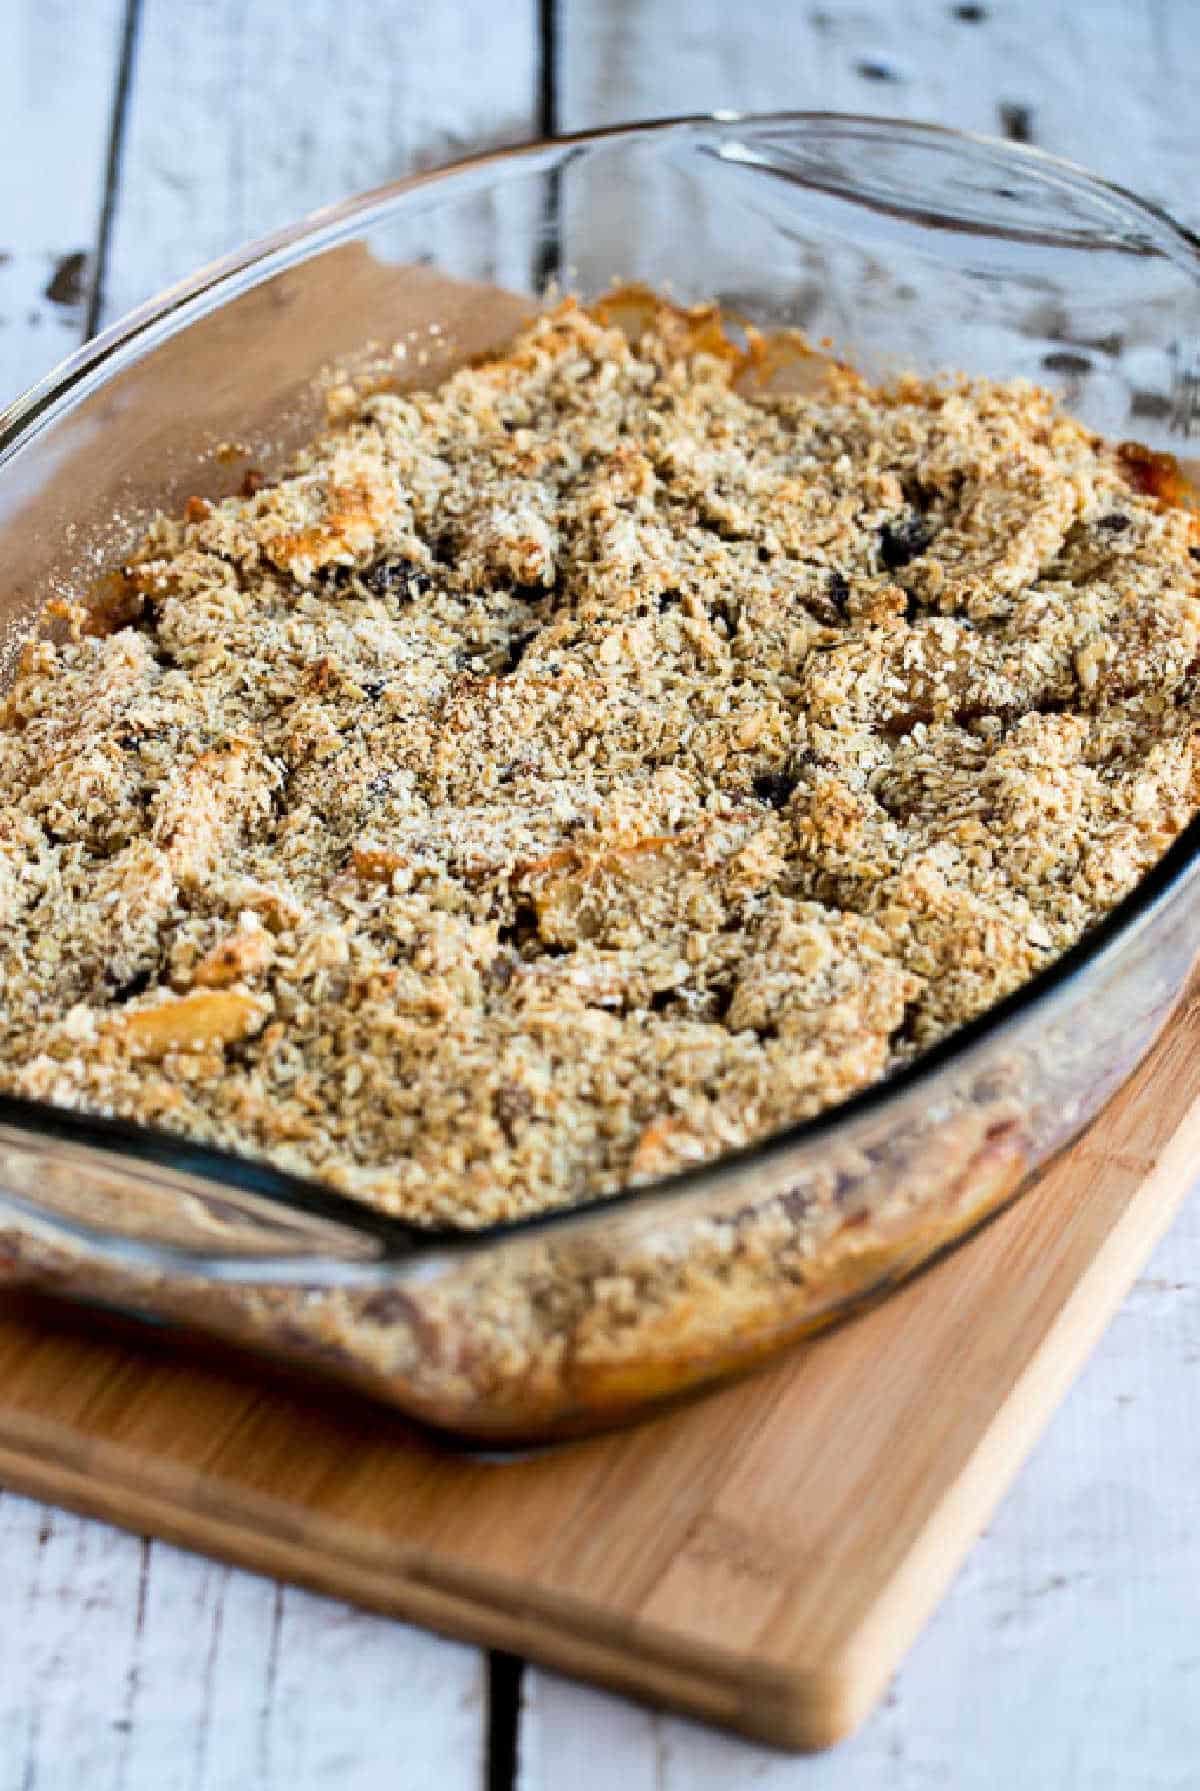 Cranberry apple crumble presented in a baking dish on a cutting board